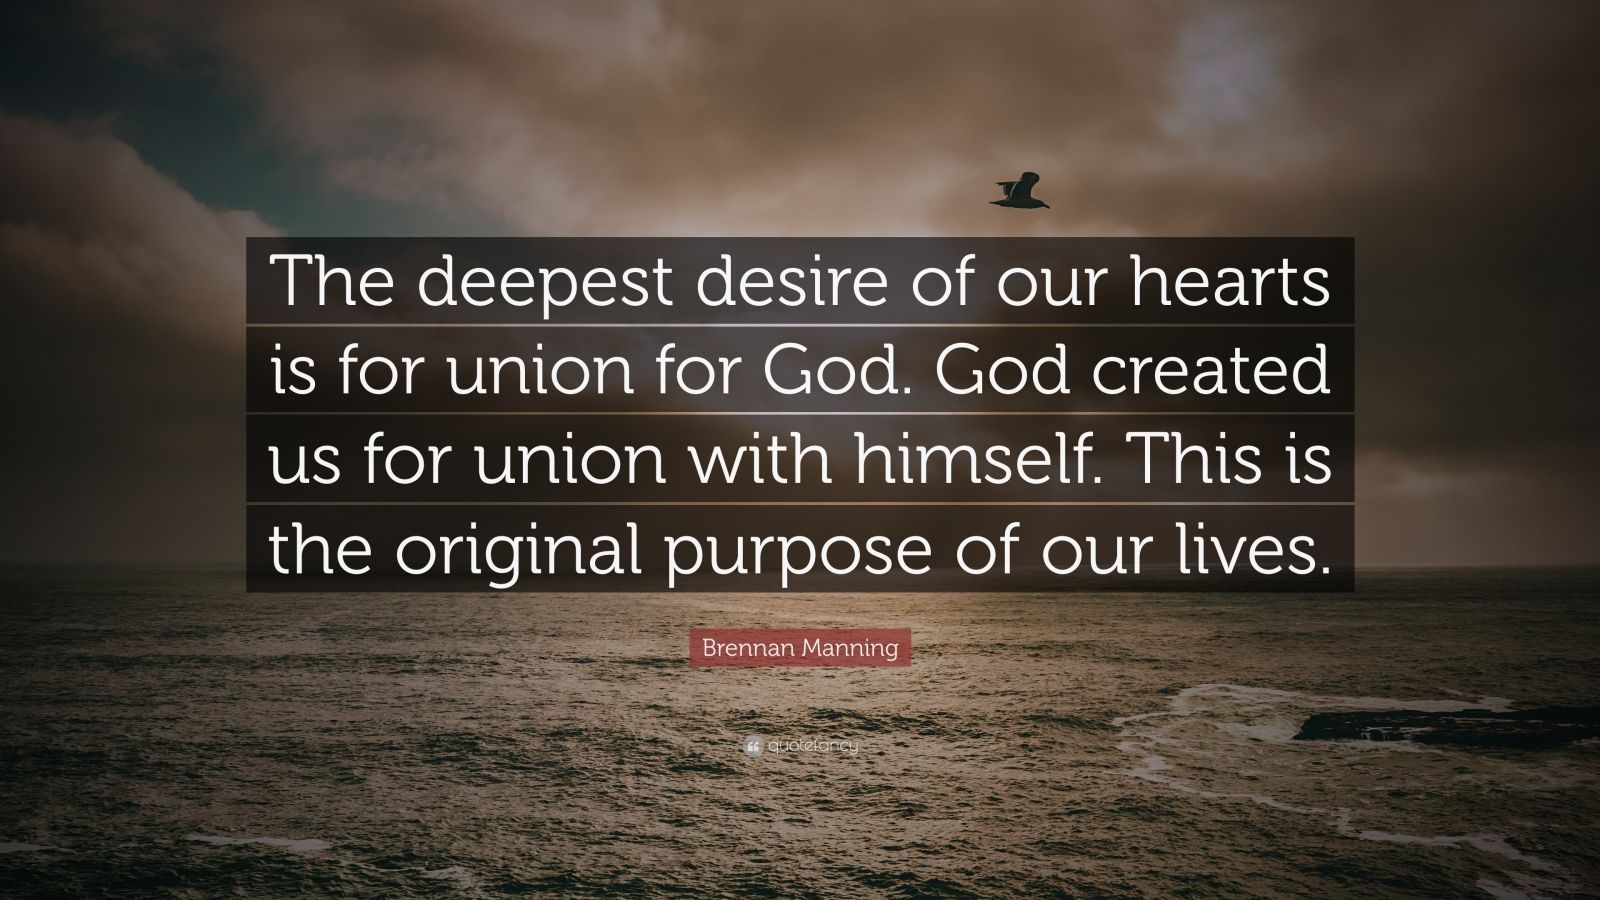 Brennan Manning Quote: “The deepest desire of our hearts is for union